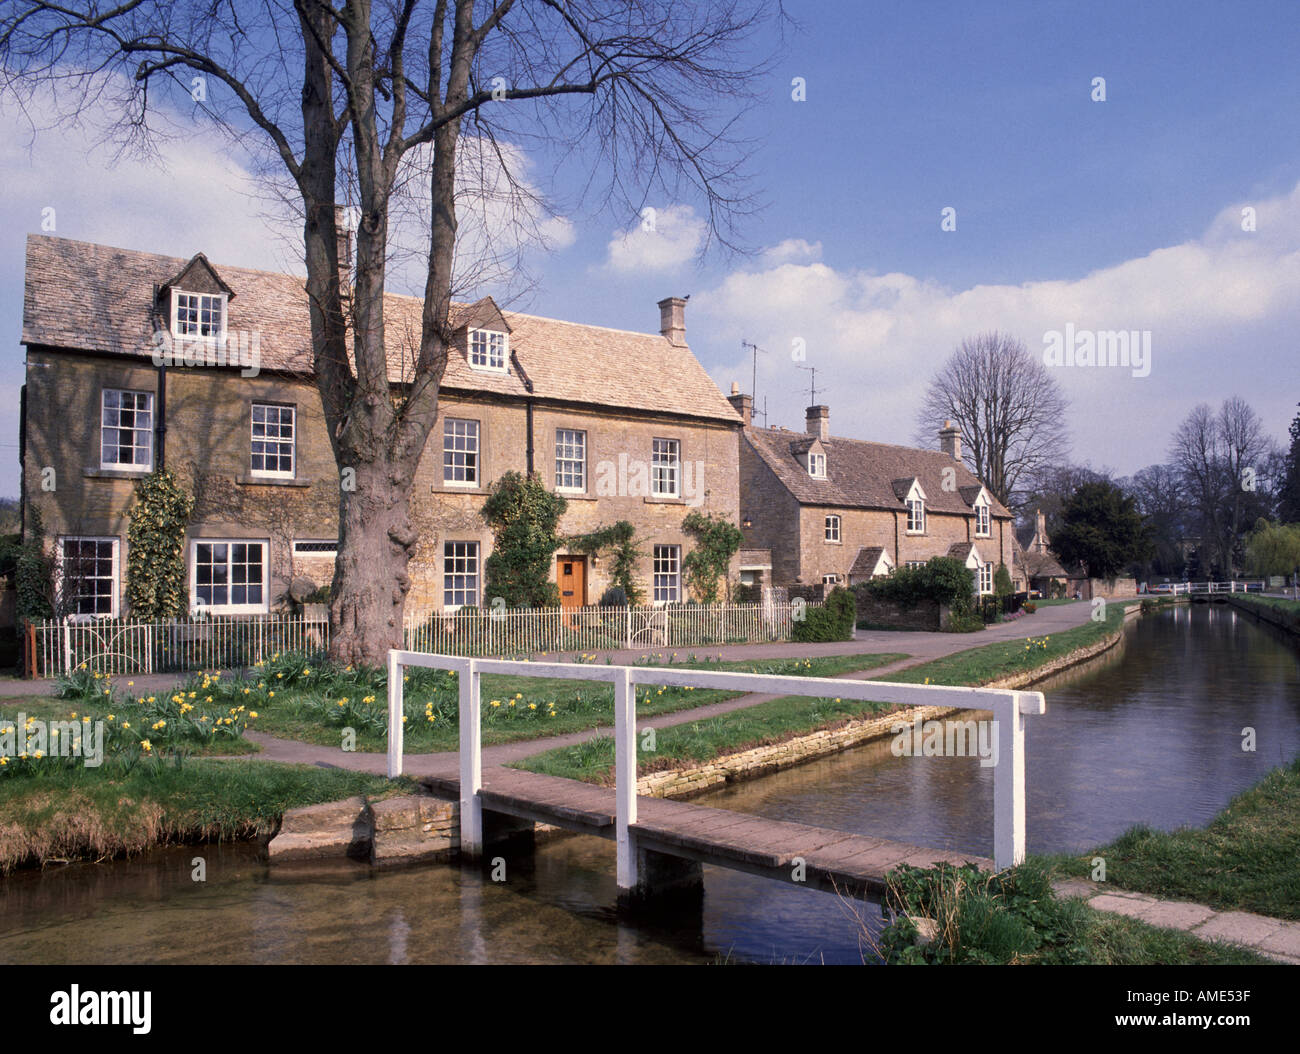 LOWER SLAUGHTER COTSWOLDS GLOUCESTERSHIRE England Regno Unito Foto Stock